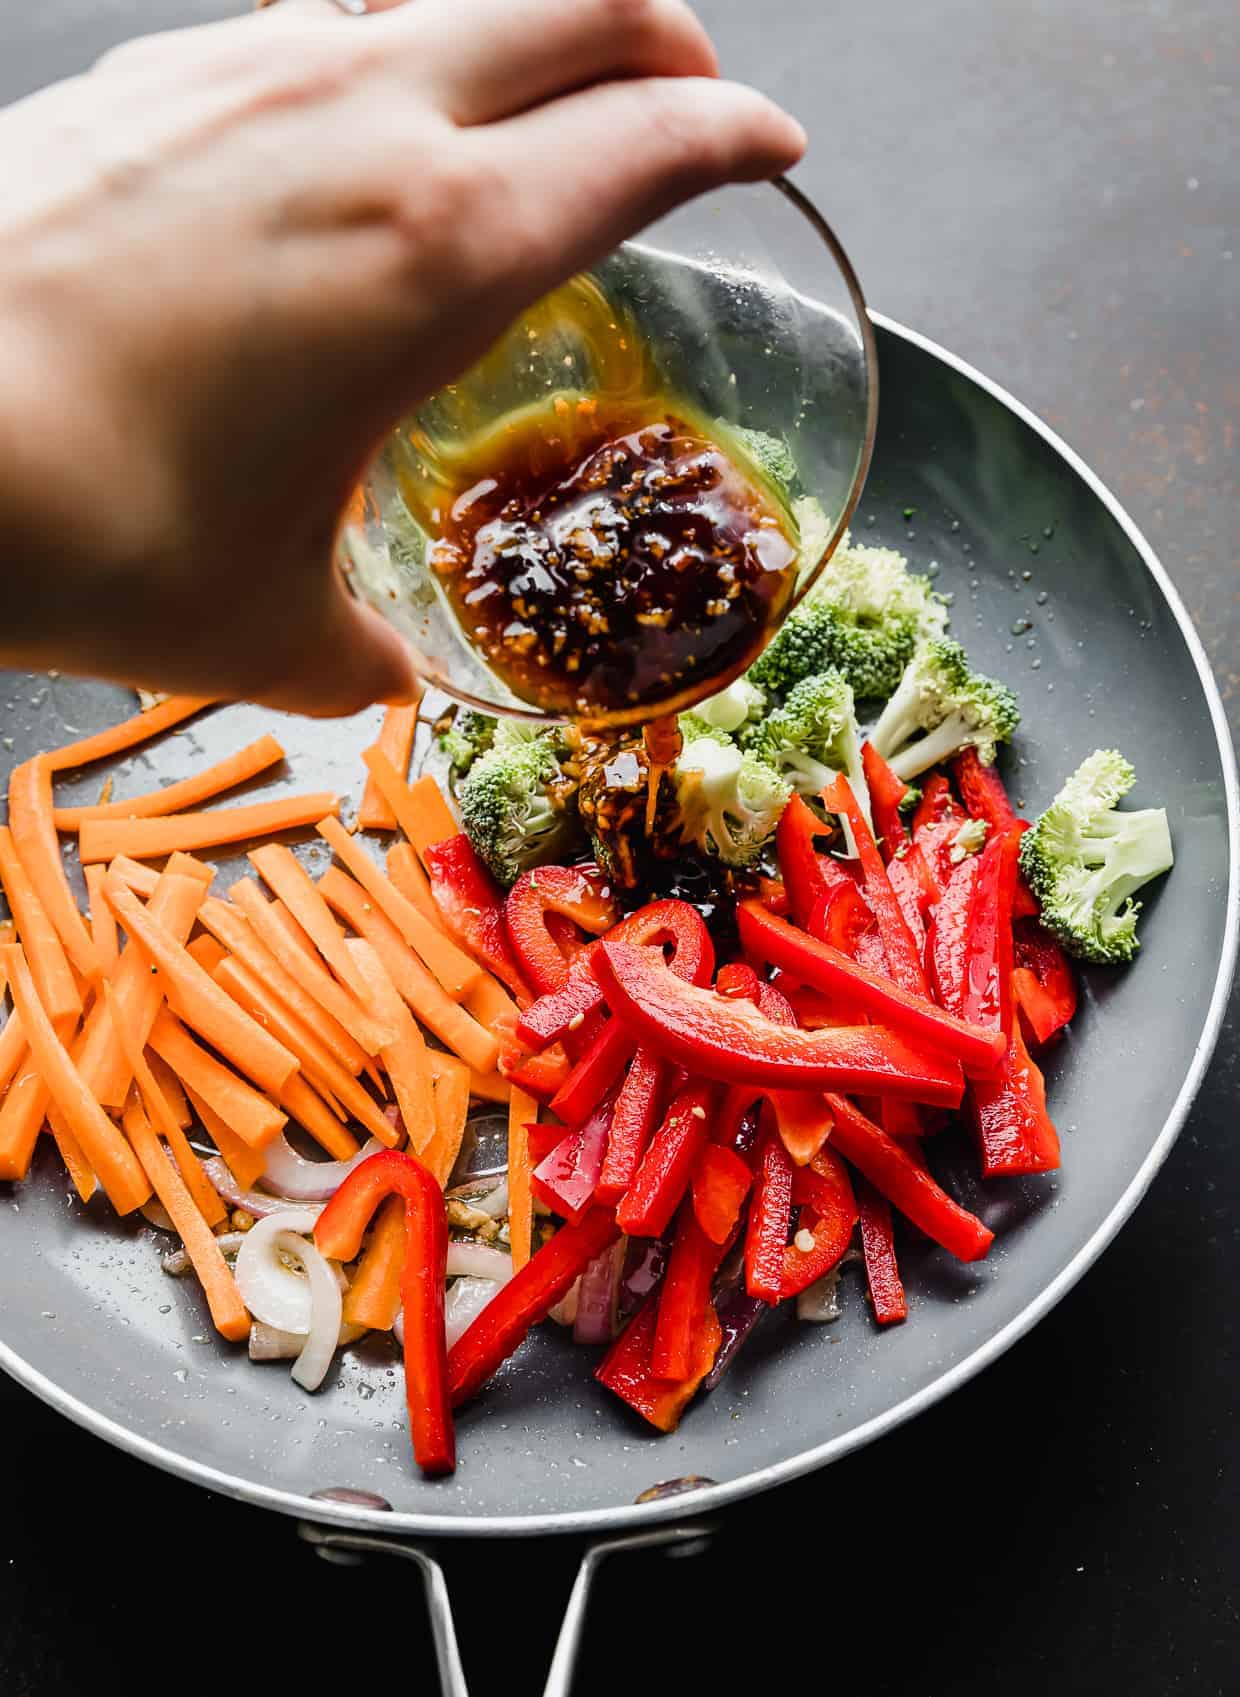 A hand pouring a brown sauce overtop of veggies in a skillet.